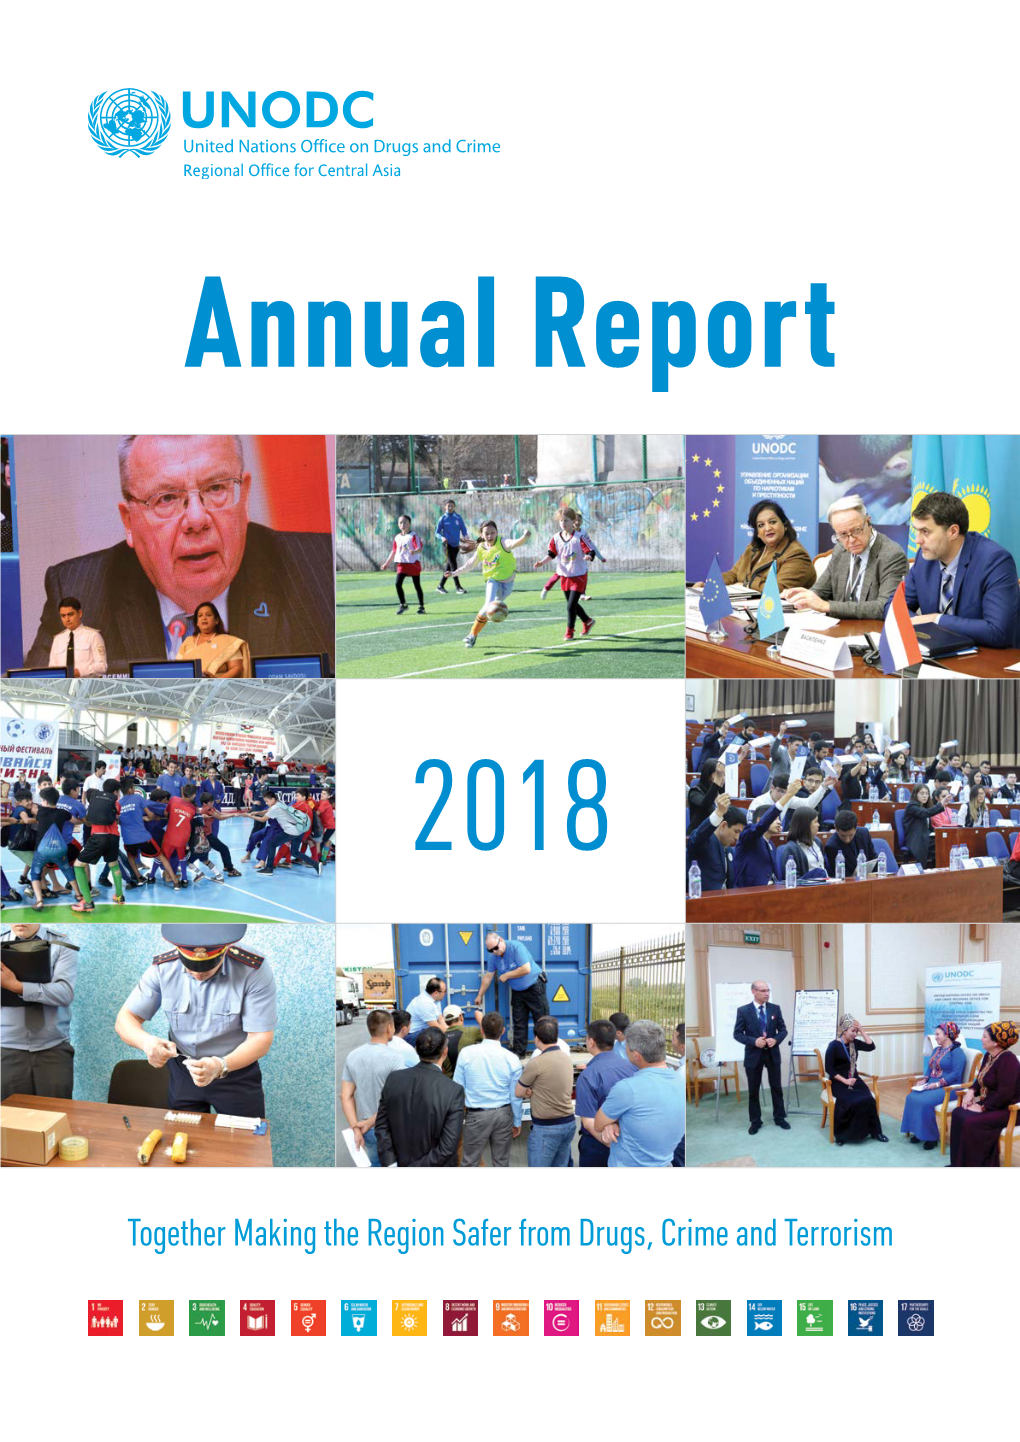 Annual Report on Technical Cooperation Delivered in 2018